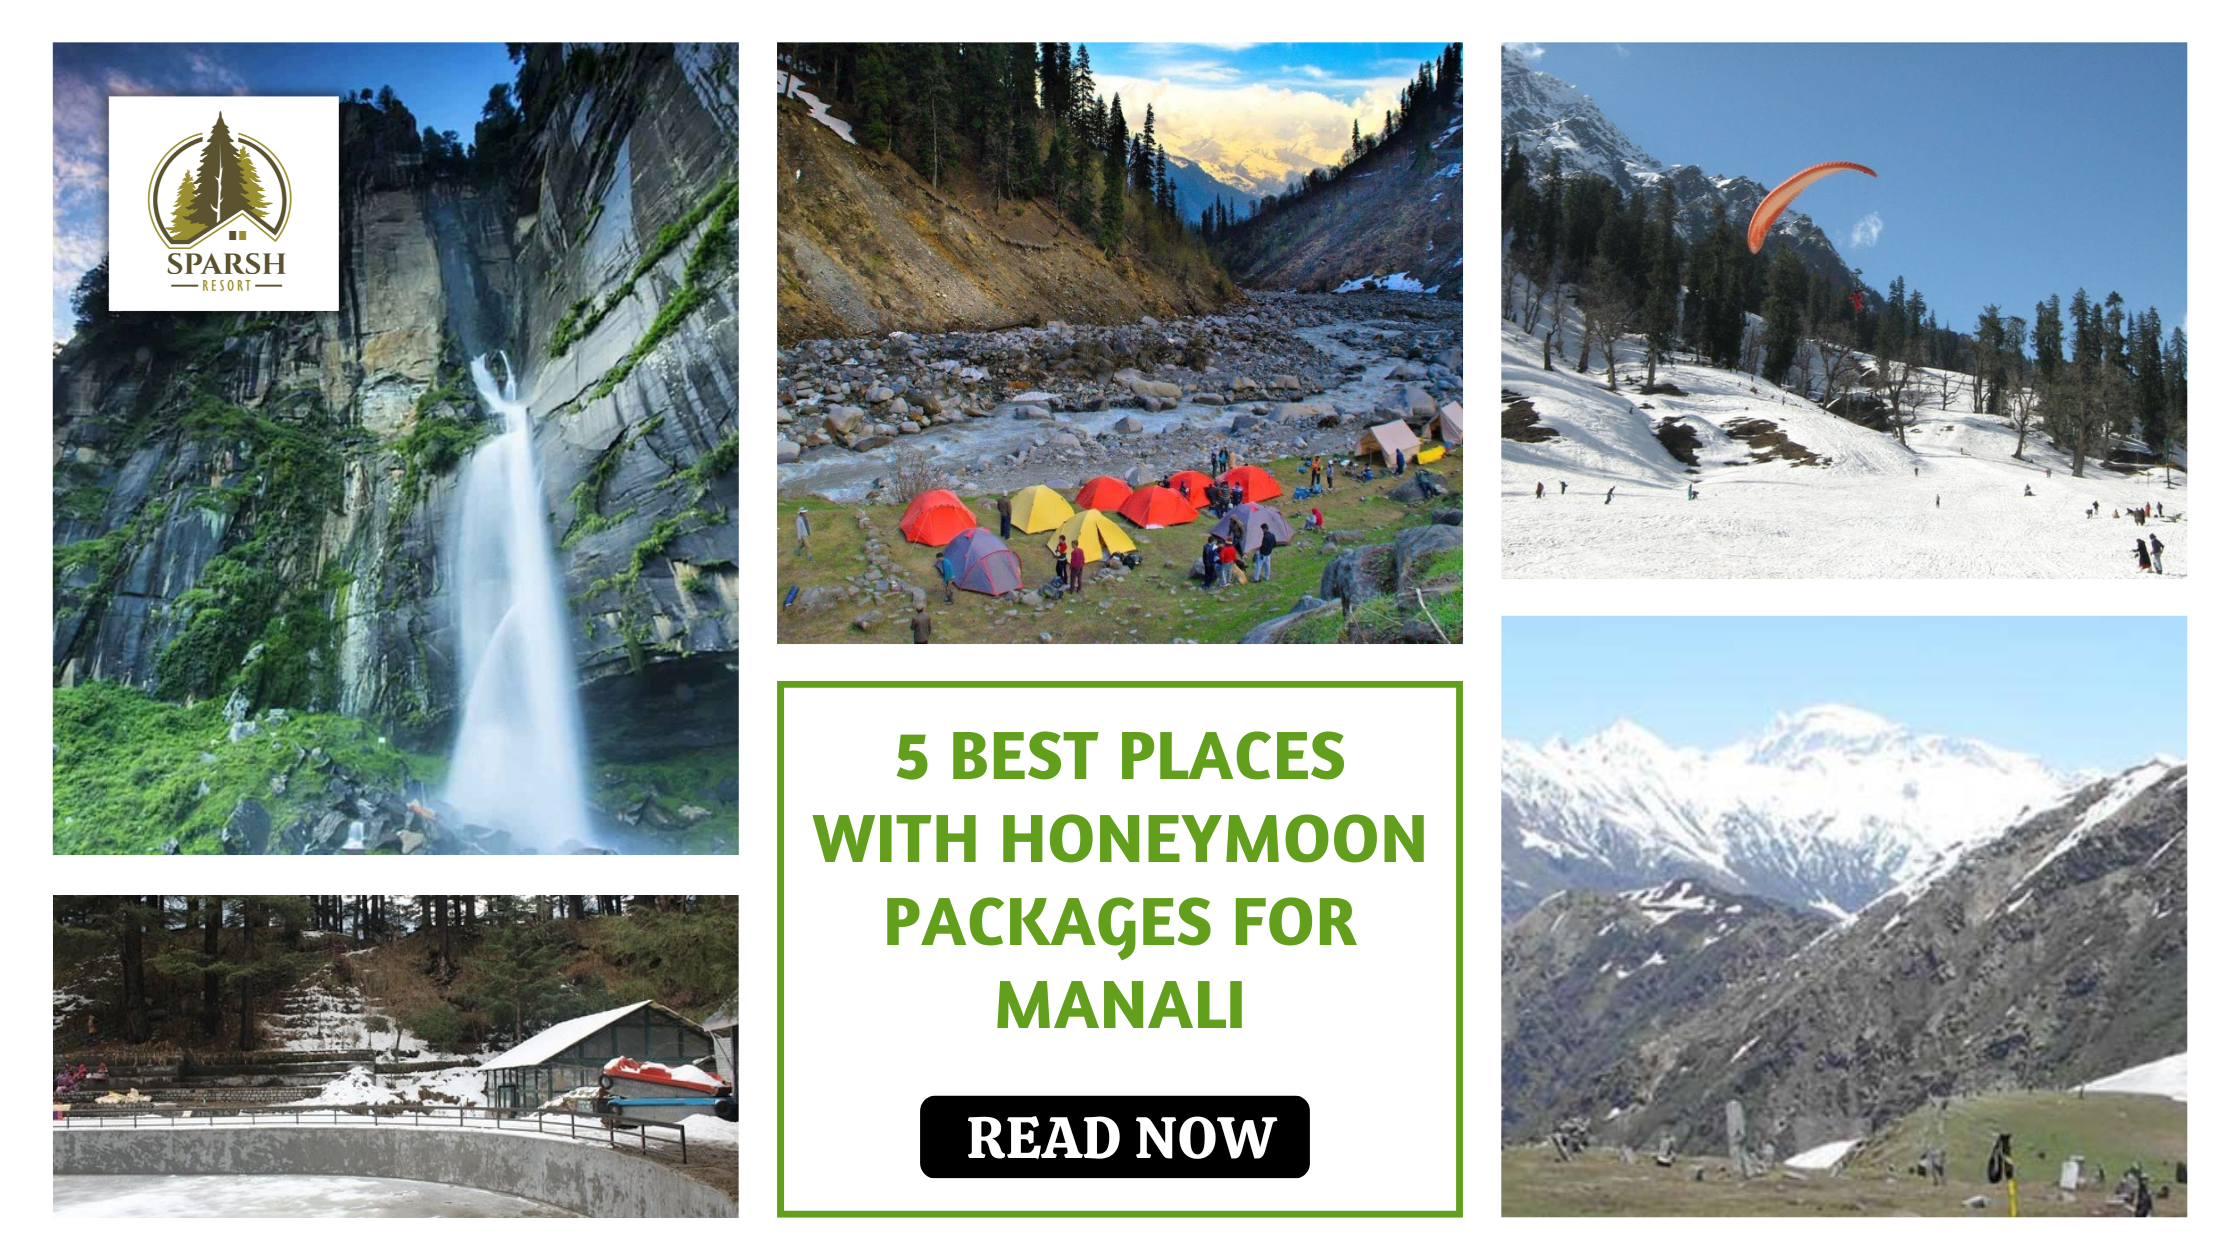 5 Best Places with Honeymoon Packages for Manali- Sparsh Resort